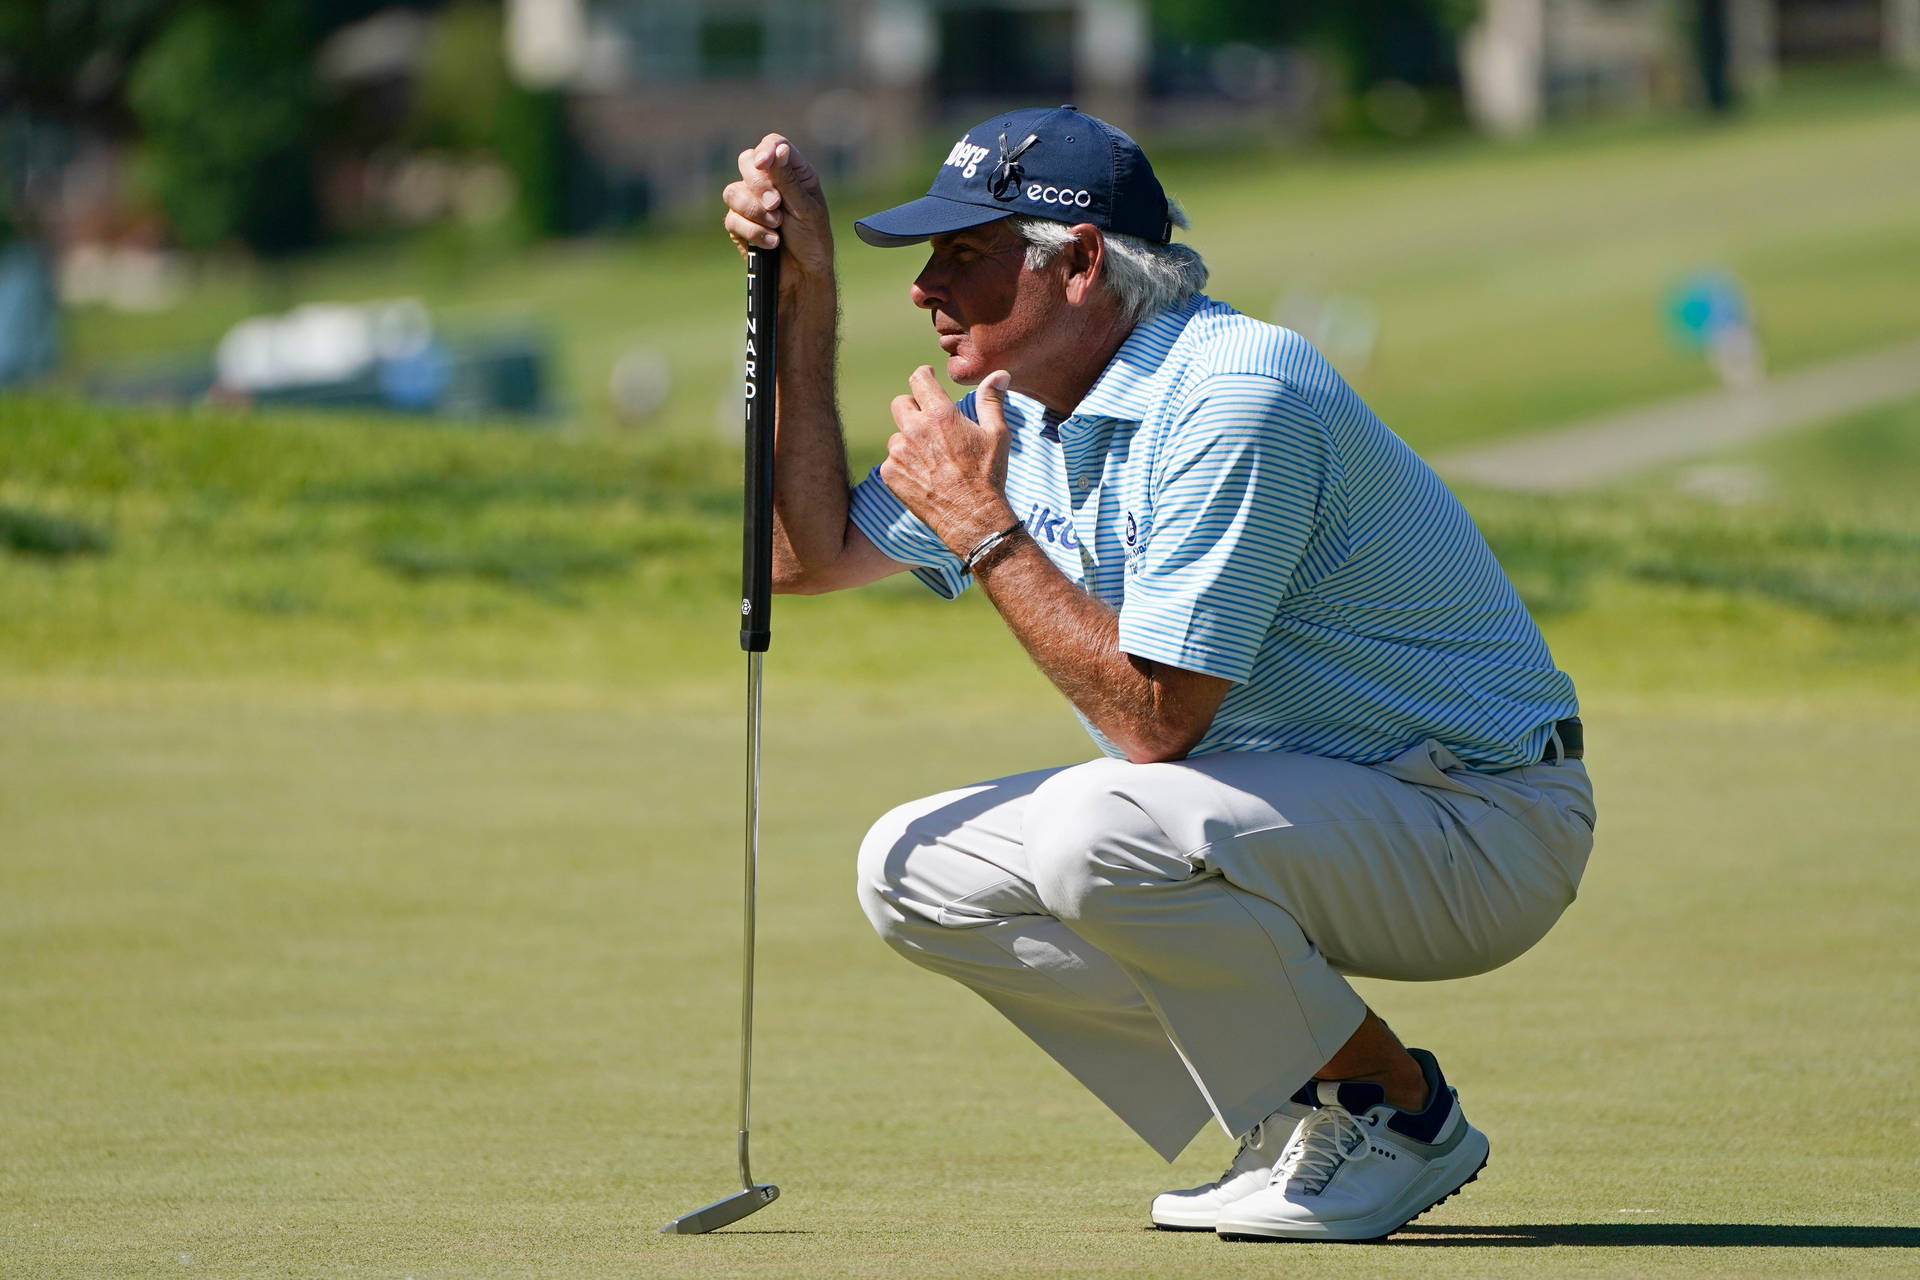 Download Fred Couples On A Golf Course Wallpaper | Wallpapers.com